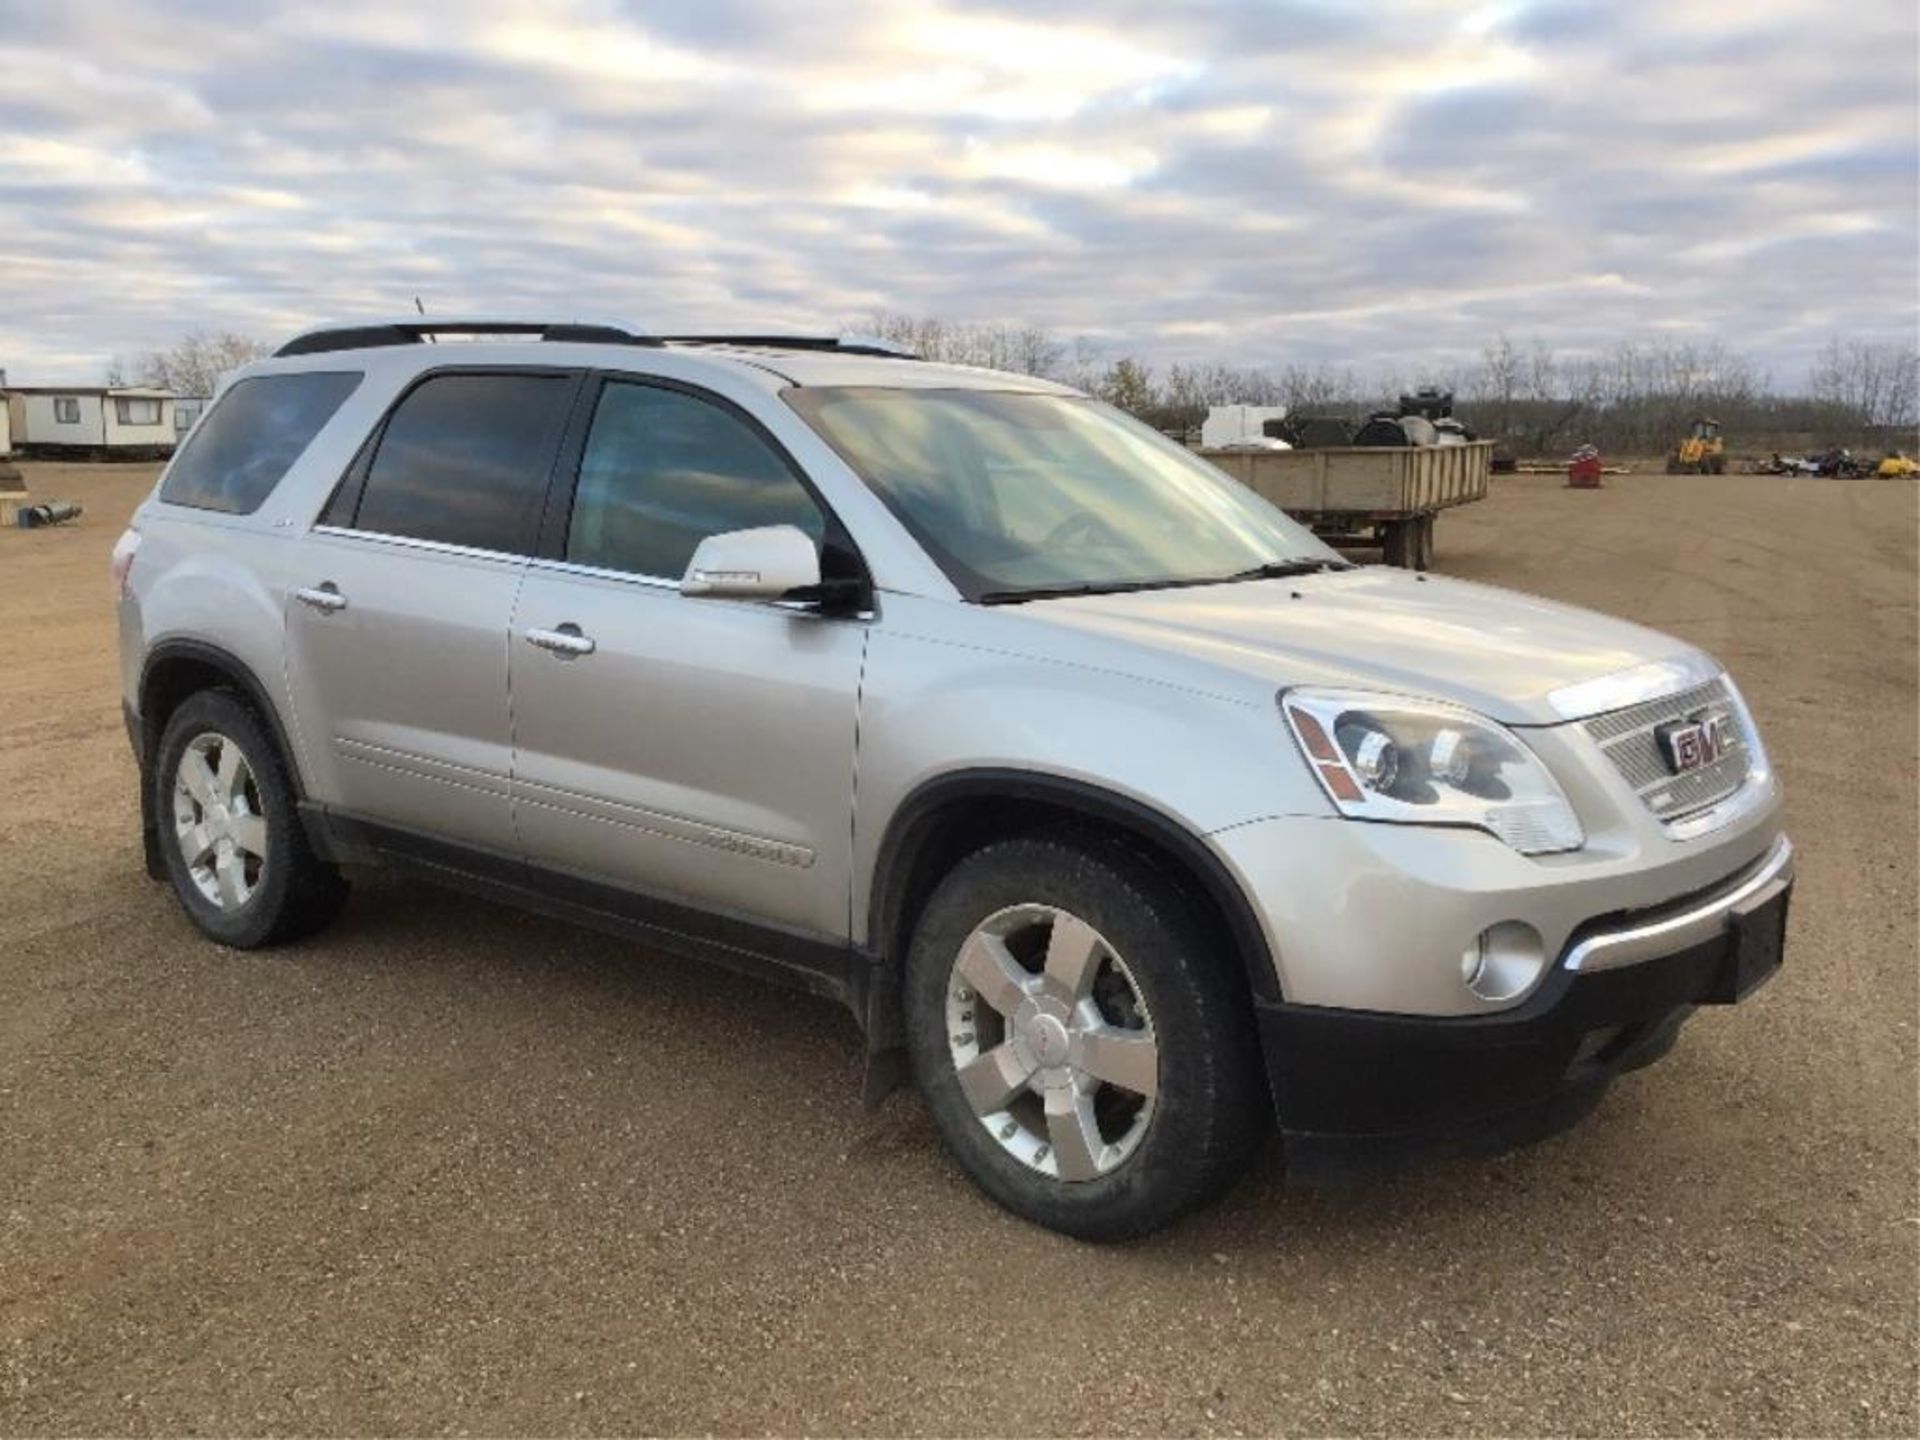 2008 GMC Acadia VIN 1GKEV33758J120730 248,185km, 7-pass, Leather Int, A/T, 3.6L V6 Eng - Image 2 of 10